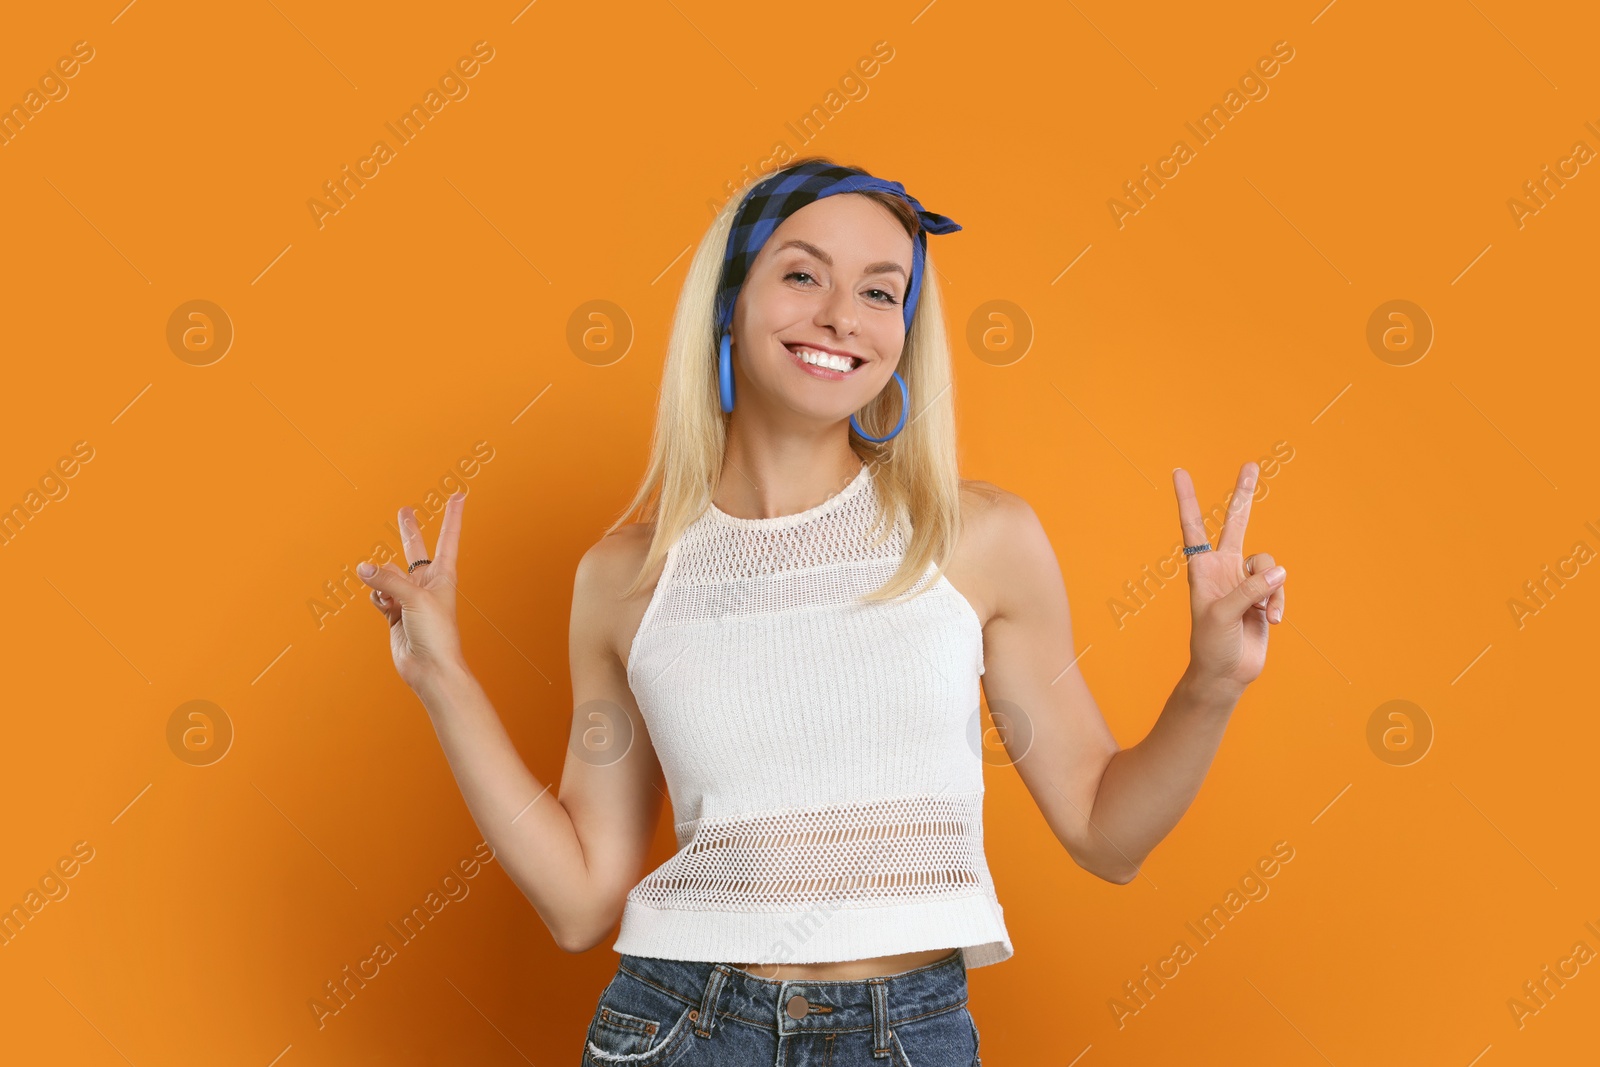 Photo of Smiling hippie woman showing peace signs on orange background